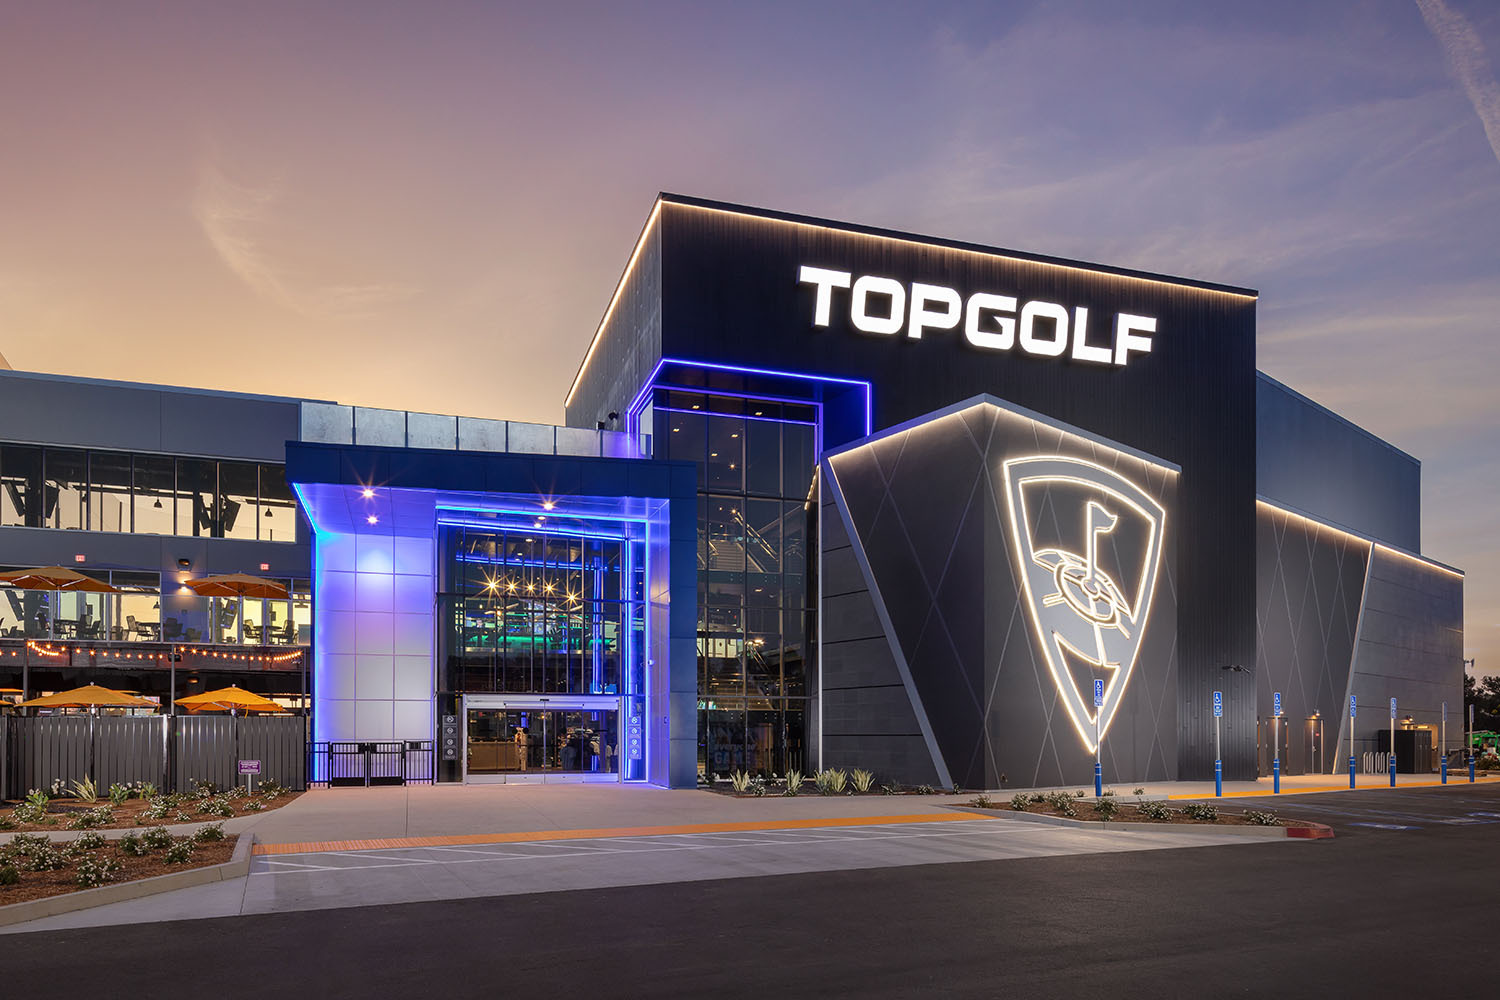 I. Overview of Top Golf Resorts